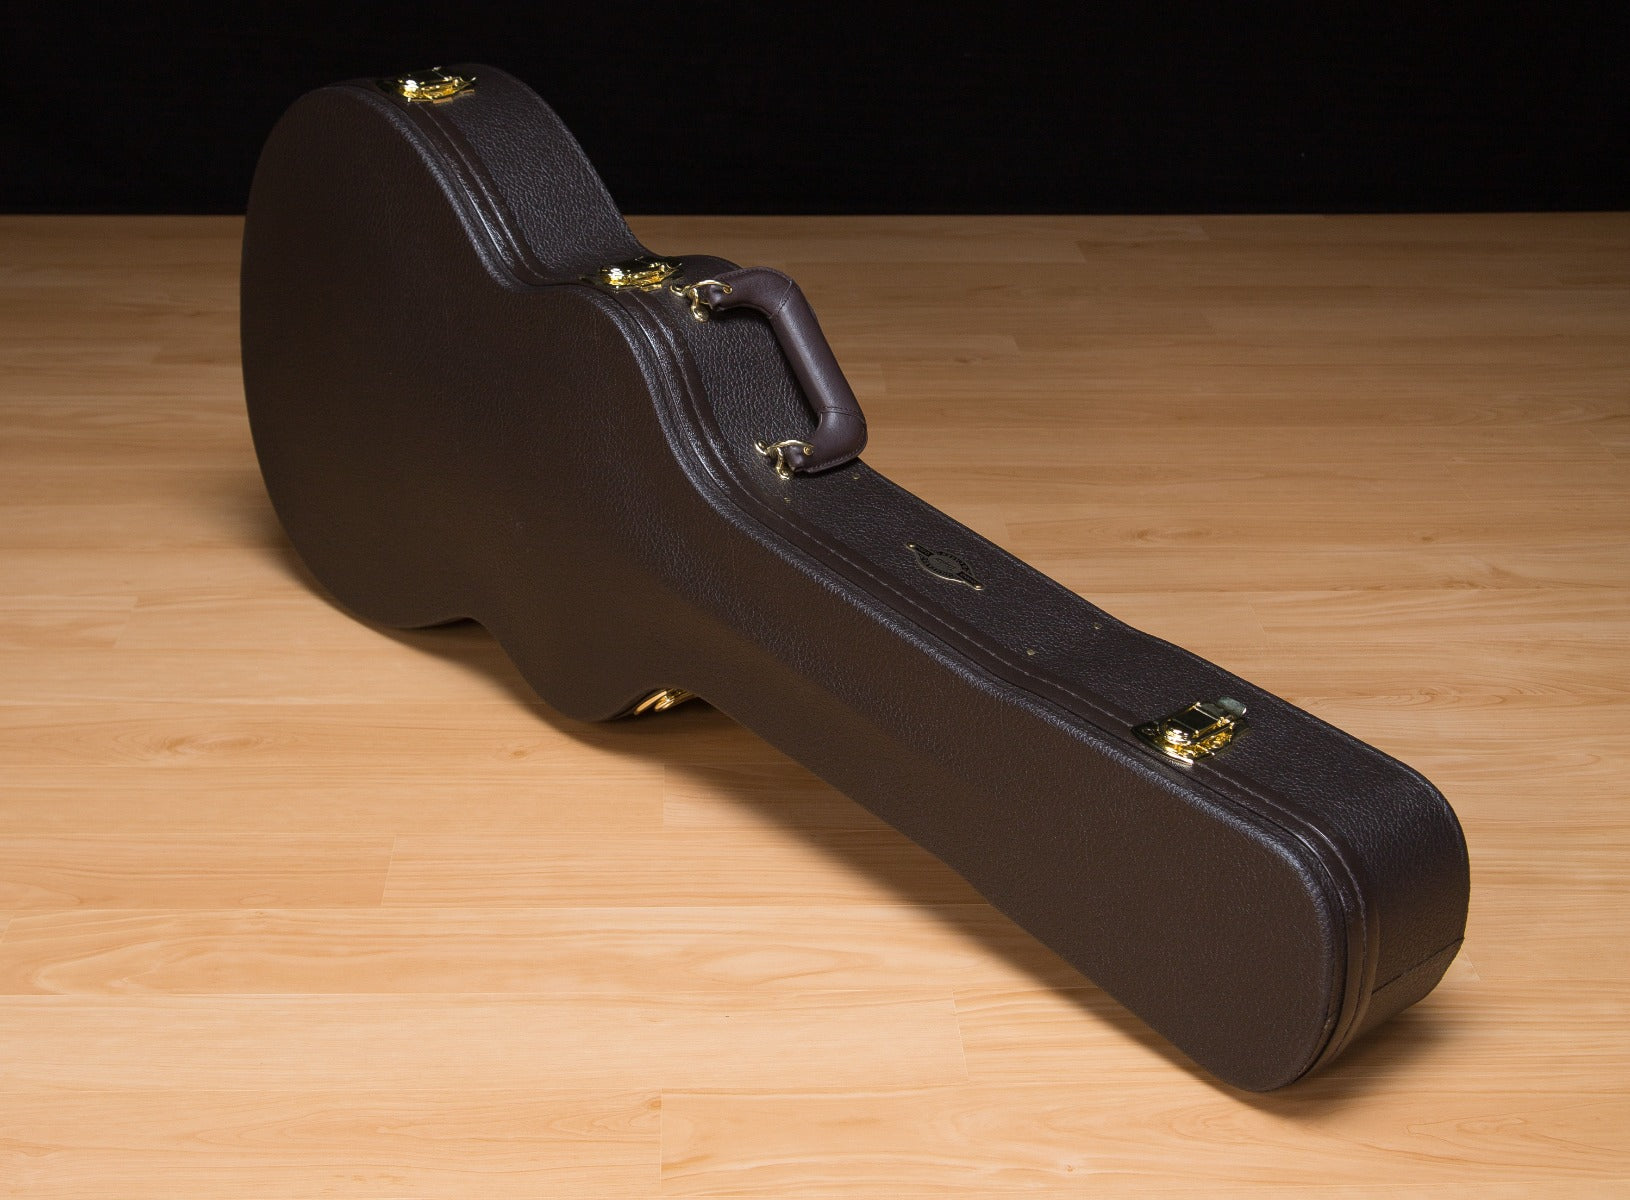 Included guitar case for the Taylor 214ce DLX Acoustic-Electric Guitar view 3